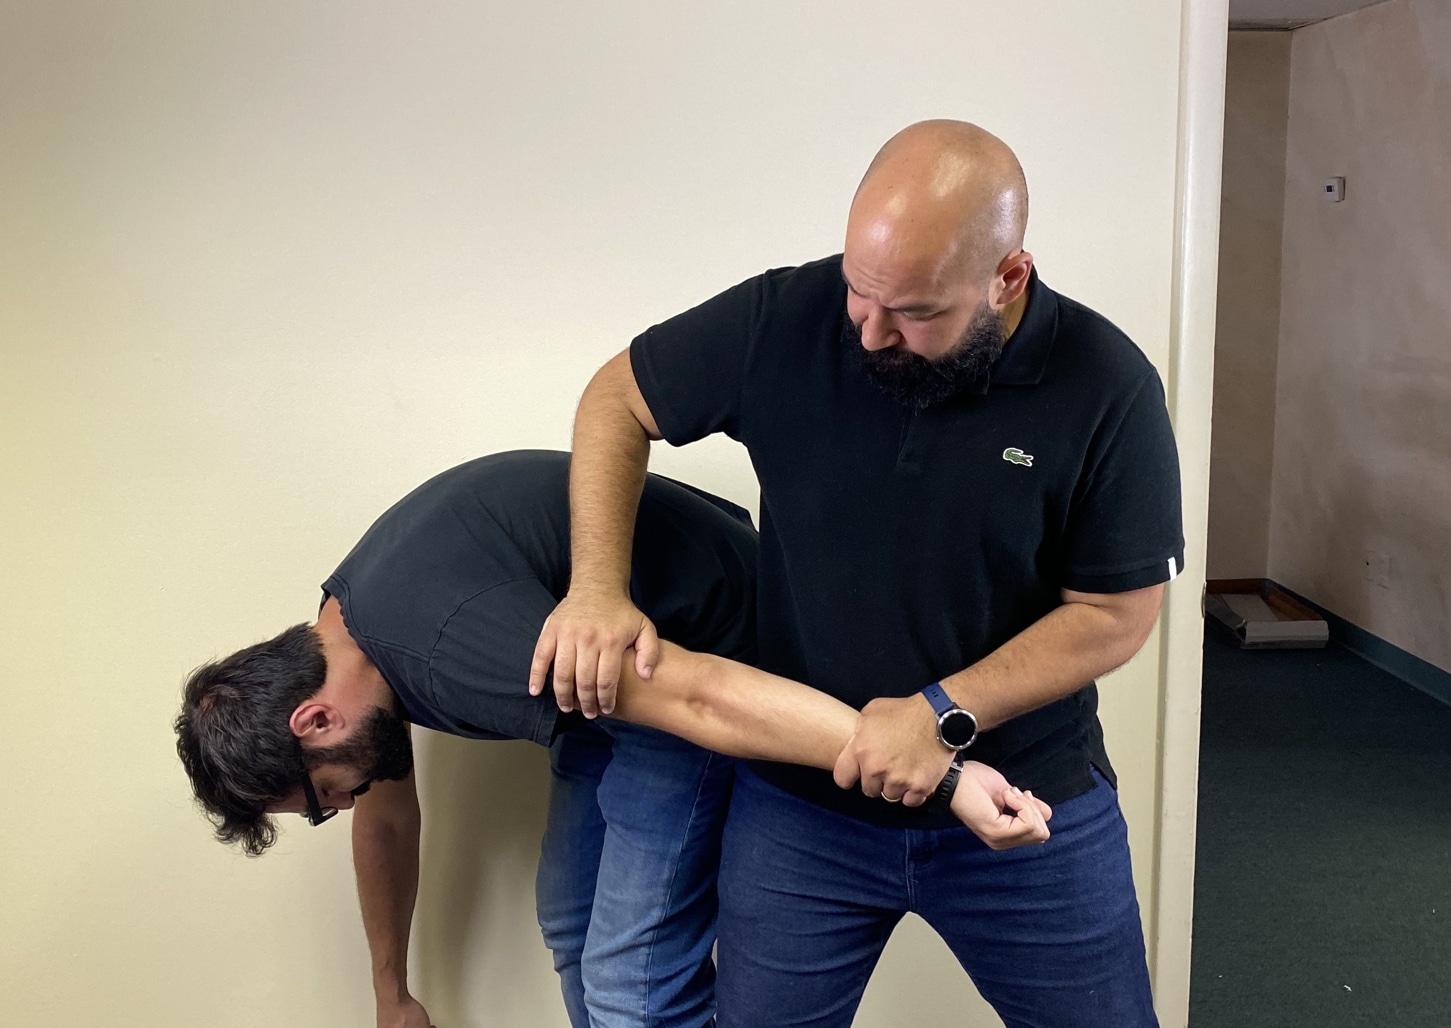 this painful hold is the wrong kind of restraint and will lead to injuries,PCM training online